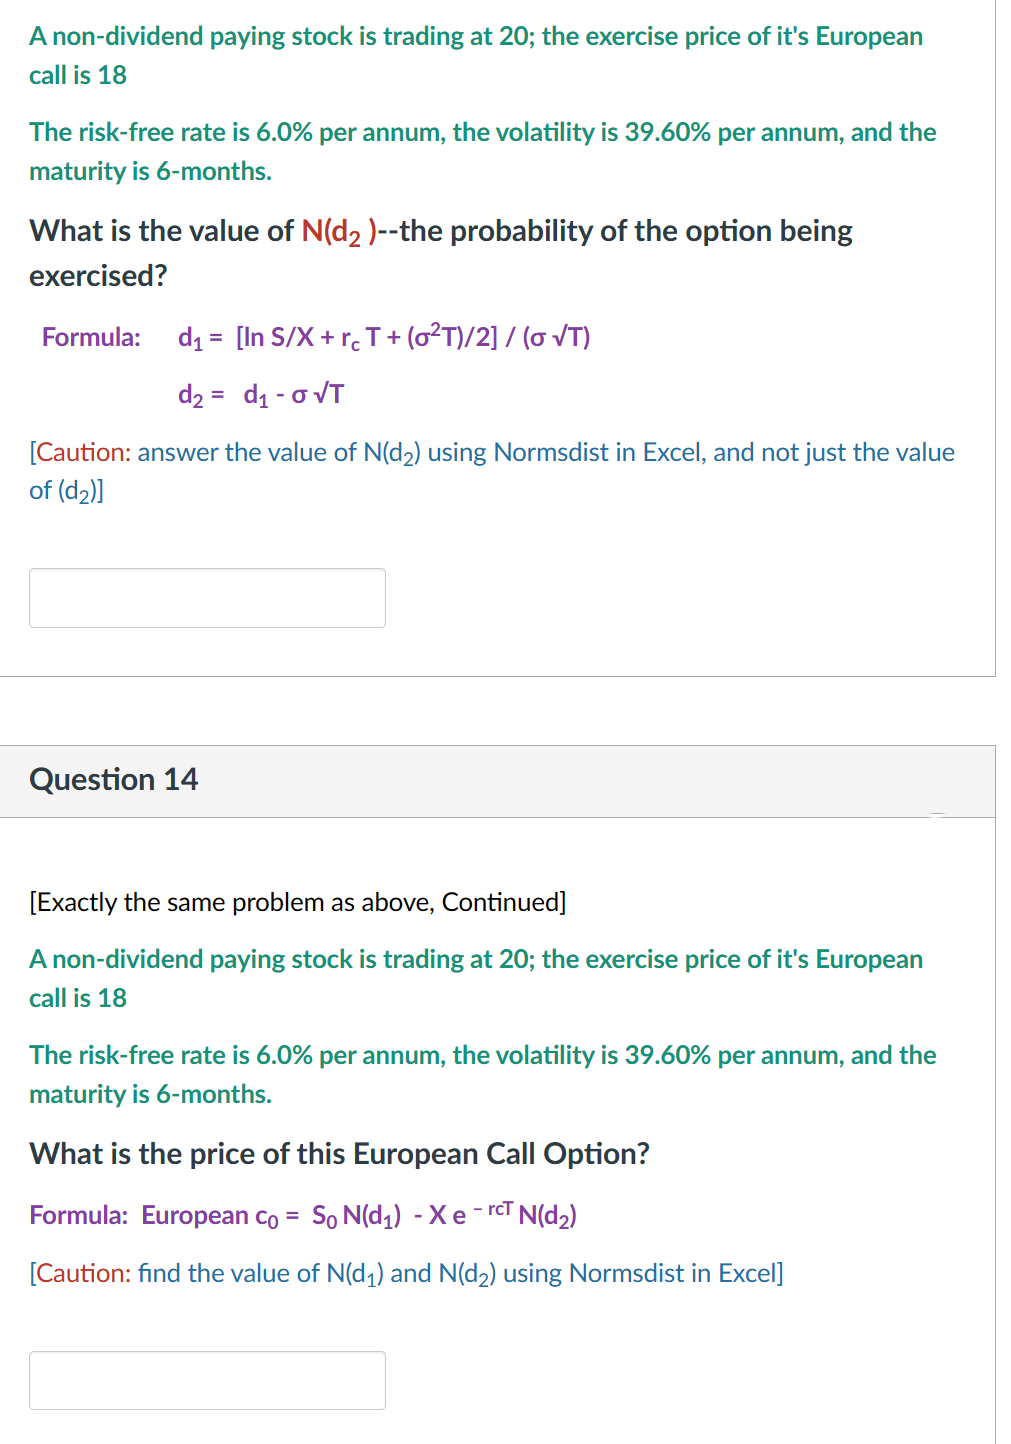 A non-dividend paying stock is trading at 20; the exercise price of it's European
call is 18
The risk-free rate is 6.0% per annum, the volatility is 39.60% per annum, and the
maturity is 6-months.
What is the value of N(d₂ )--the probability of the option being
exercised?
Formula: d₁ = [In S/X + rc T + (0²T)/2] / ( √T)
d₂ = d₁ - 0 √T
[Caution: answer the value of N(d₂) using Normsdist in Excel, and not just the value
of (d₂)]
Question 14
[Exactly the same problem as above, Continued]
A non-dividend paying stock is trading at 20; the exercise price of it's European
call is 18
The risk-free rate is 6.0% per annum, the volatility is 39.60% per annum, and the
maturity is 6-months.
What is the price of this European Call Option?
Formula: European co = So N(d₁) - Xe-rcT N(d₂)
[Caution: find the value of N(d₁) and N(d₂) using Normsdist in Excel]